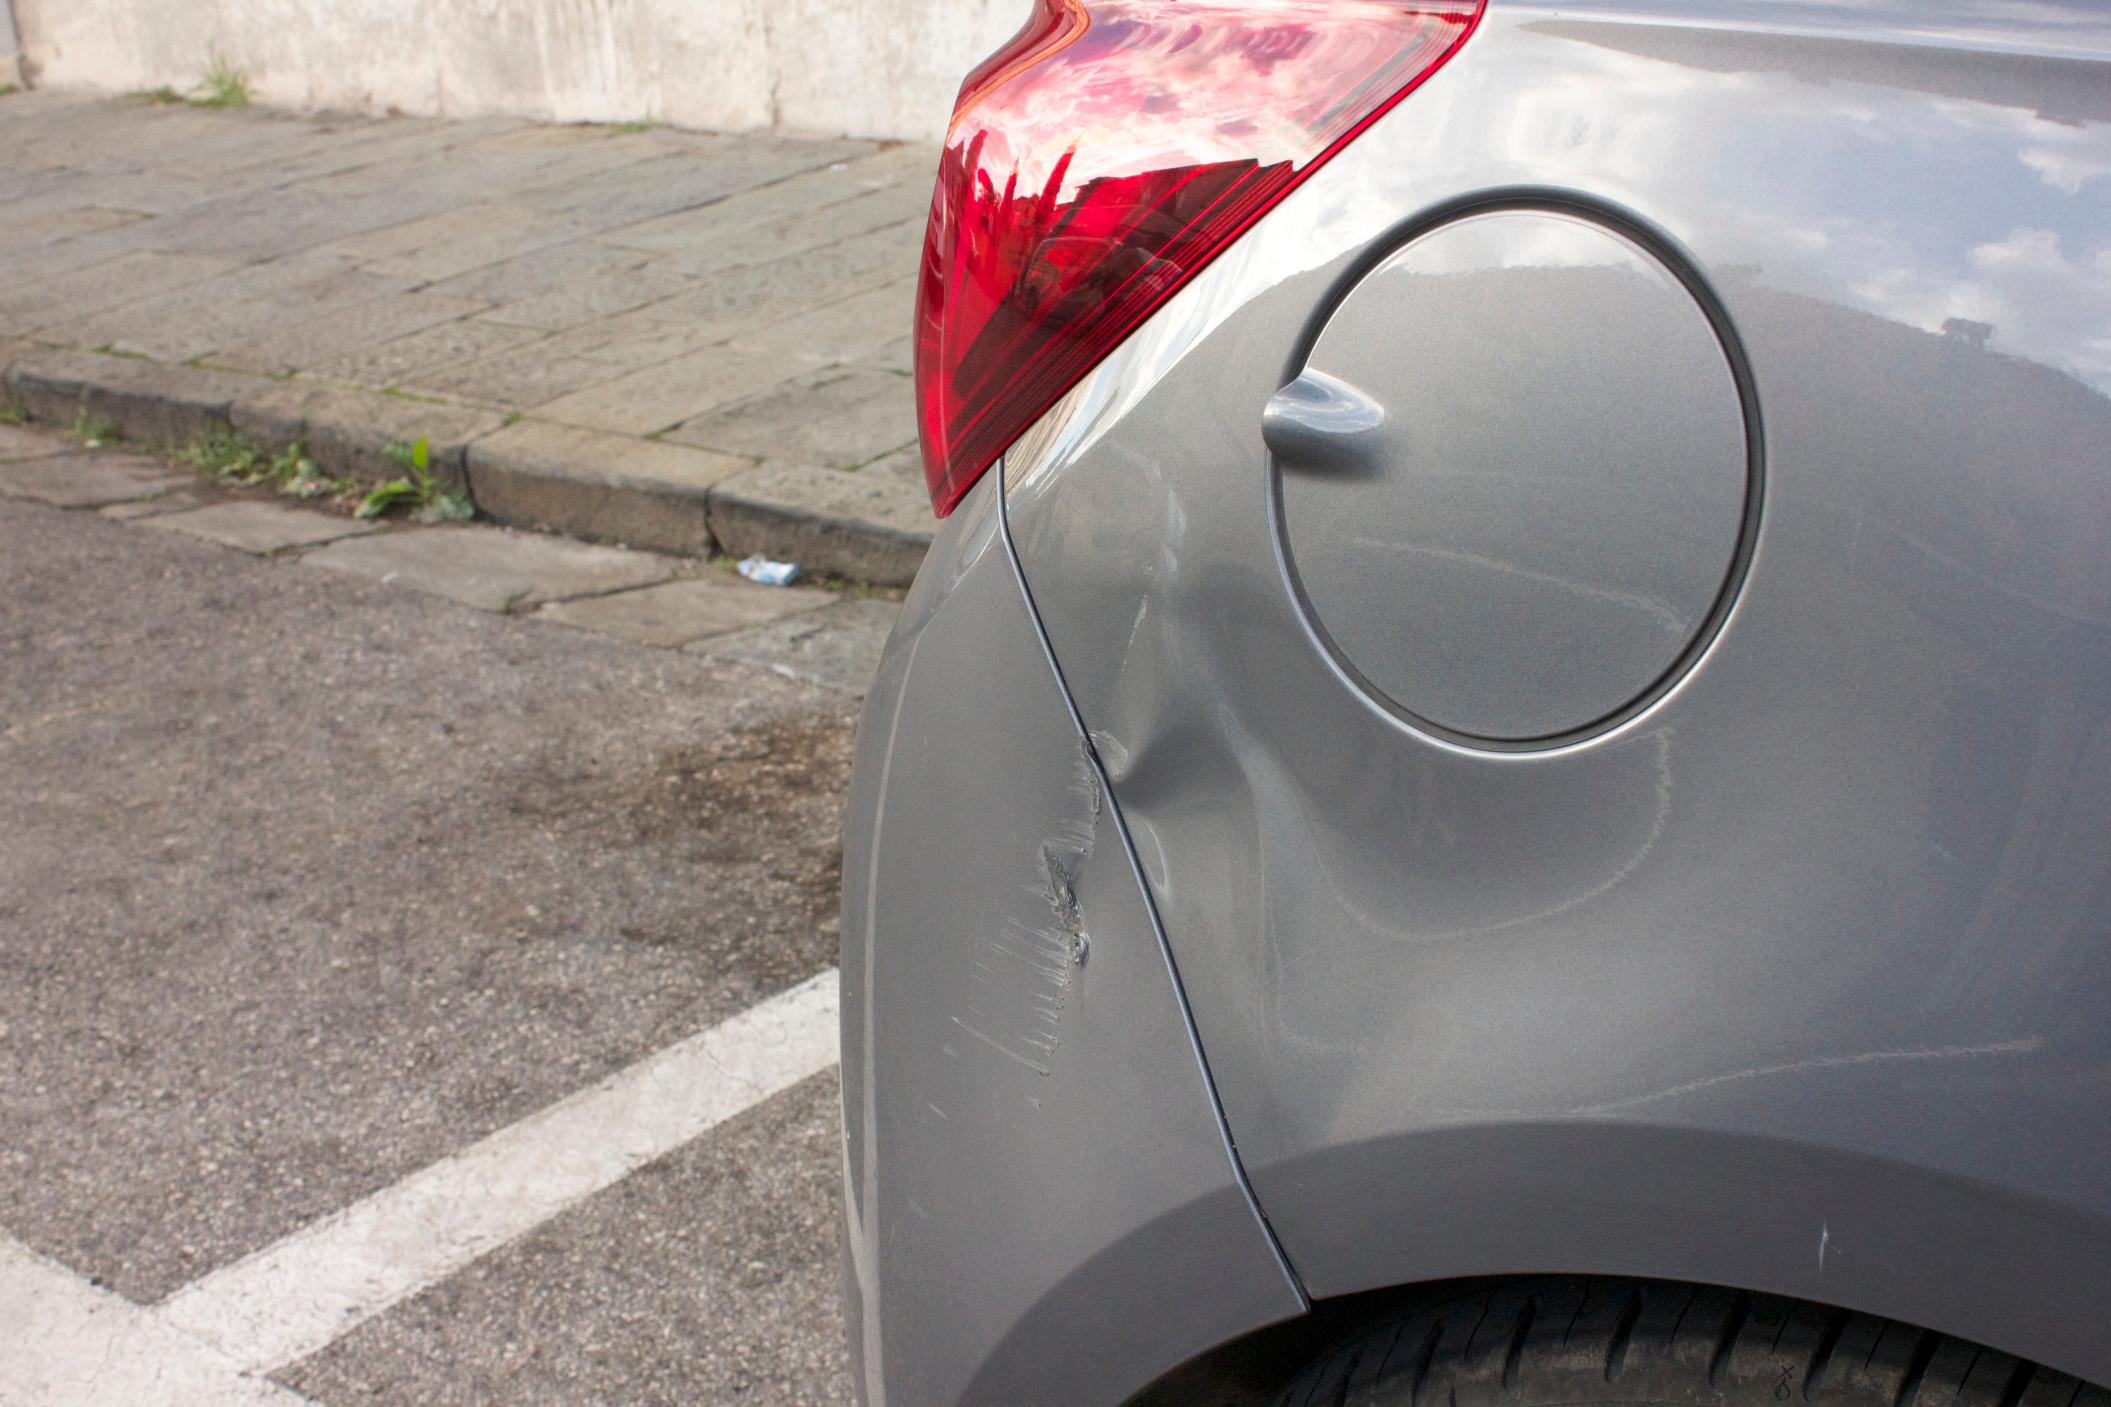 You’ve accidentally made a minor dent in your car, is it worth it to fix it?